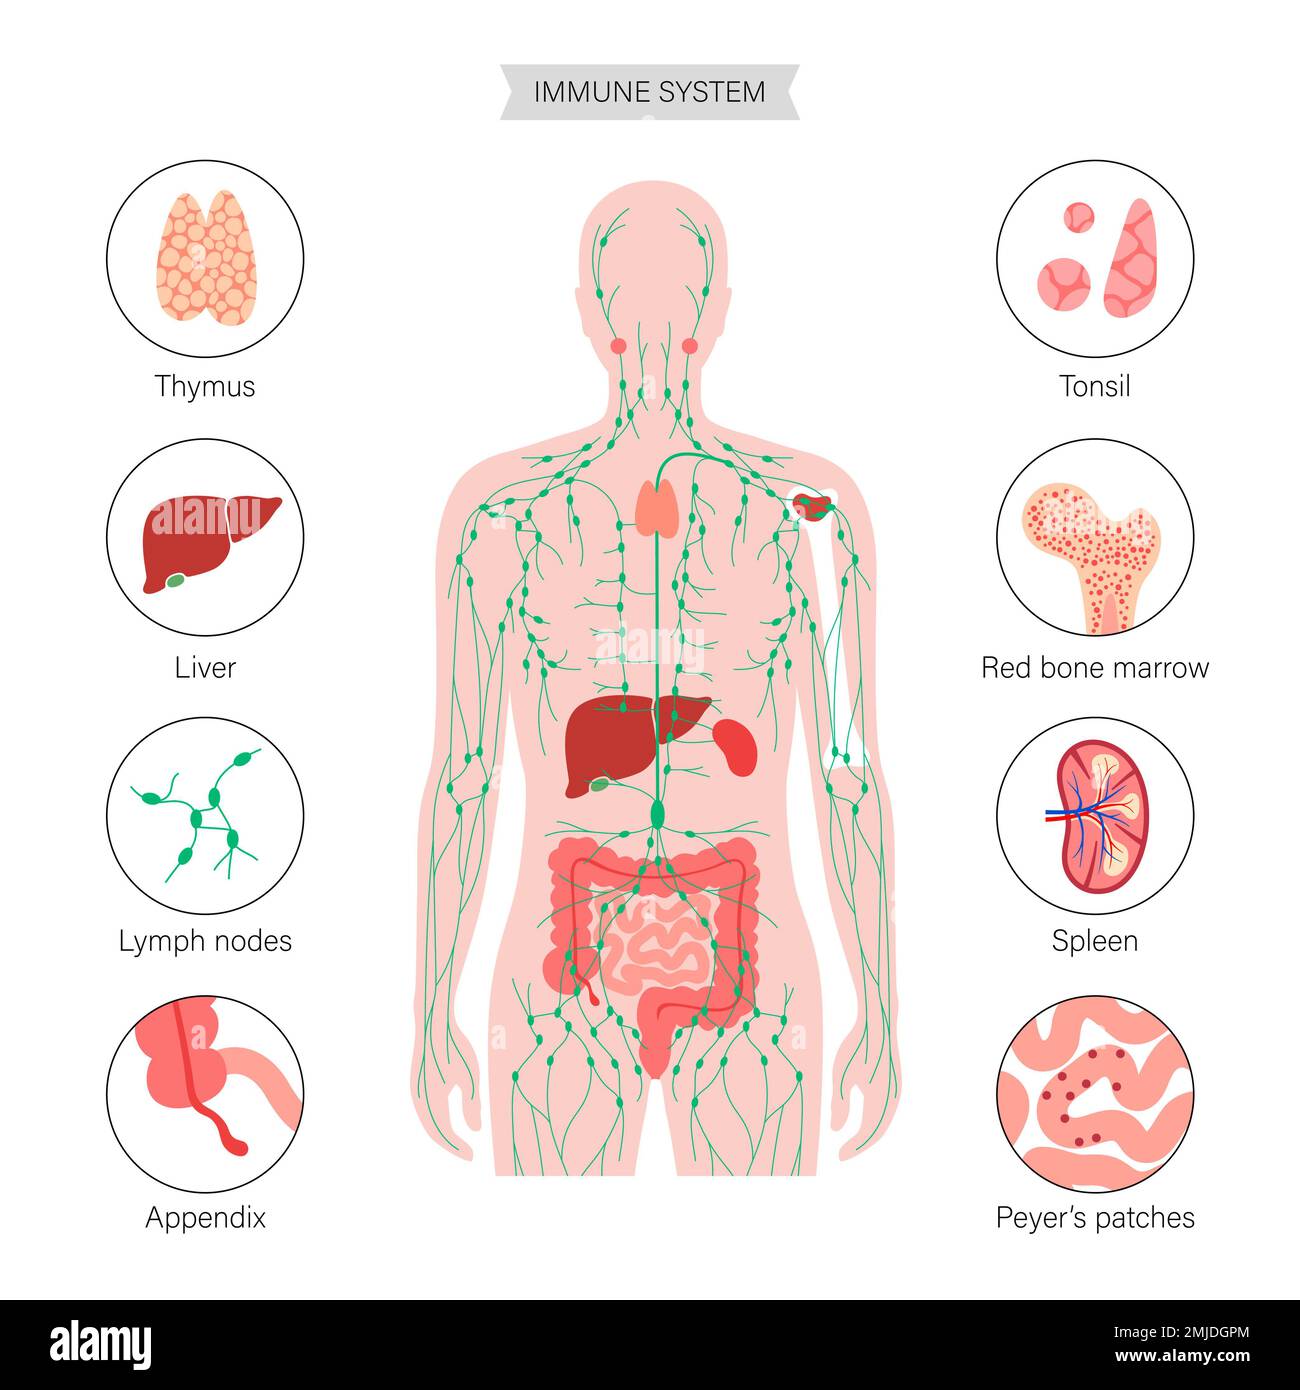 Lymphatic system and organs, illustration Stock Photo